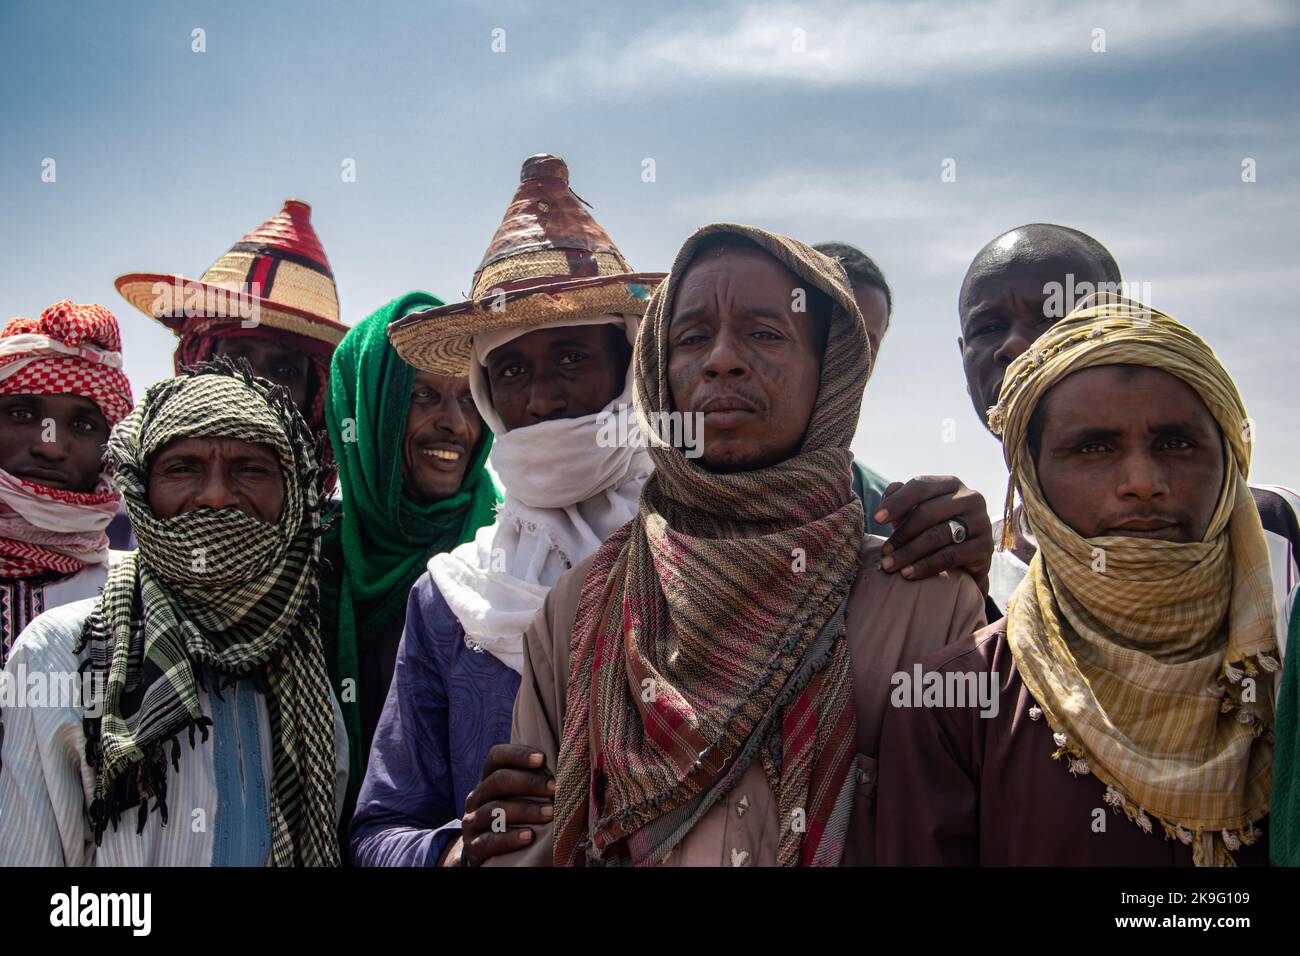 African tribes, Nigeria, Borno State, Maiduguri city. Members of Fulani tribe traditionally dressed in colorful clothing at tribal gathering Stock Photo